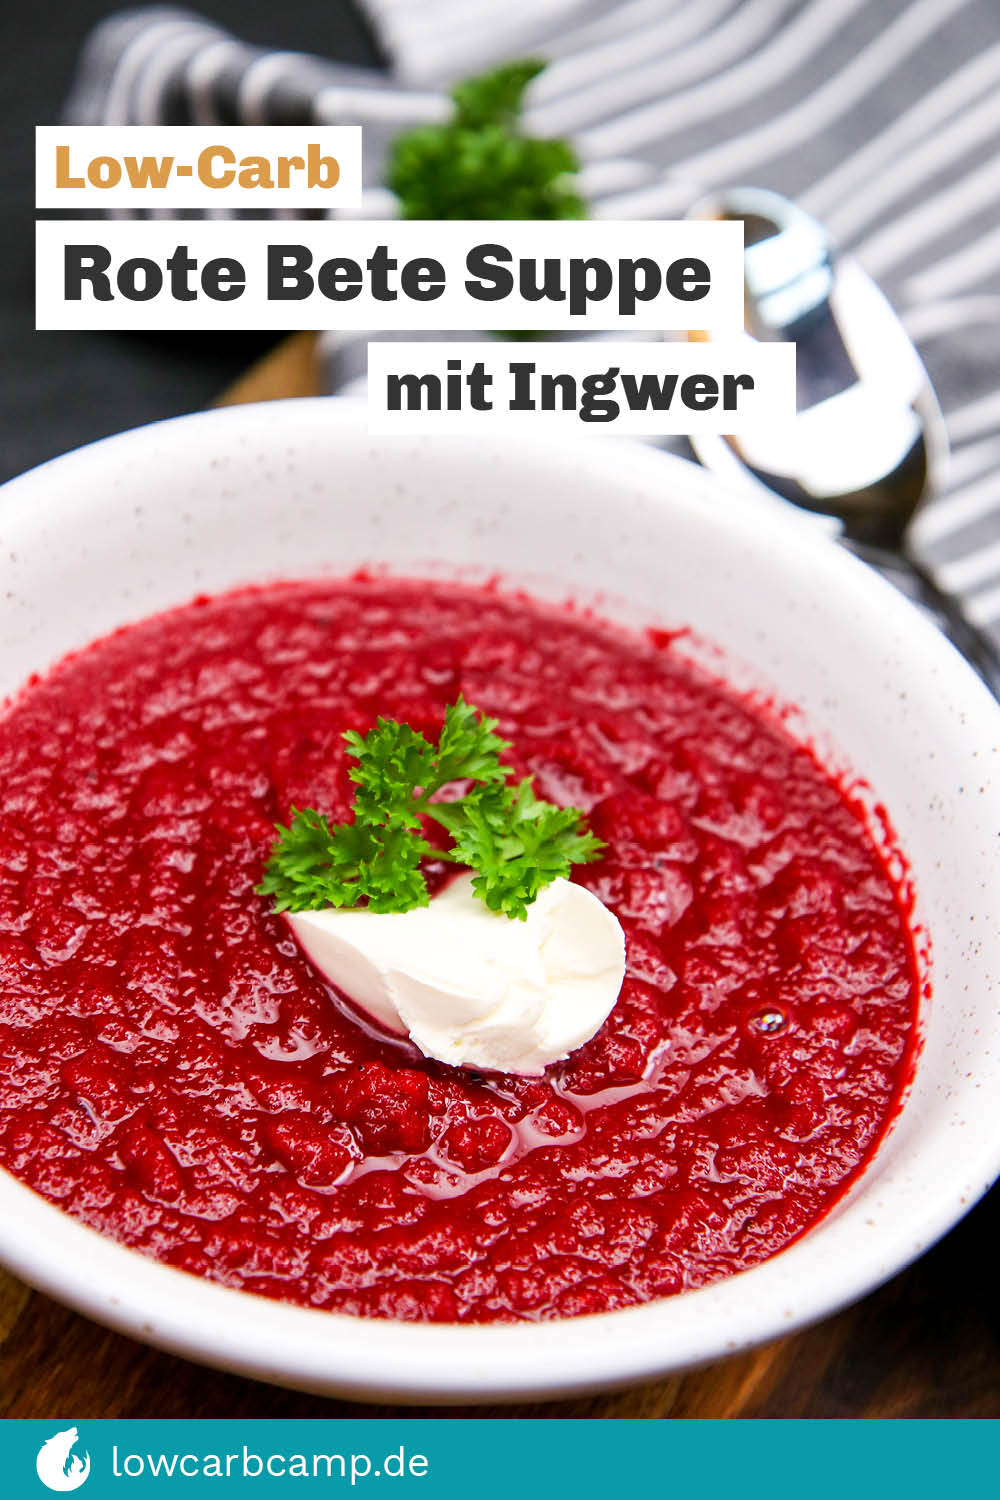 Rote Bete Suppe mit Ingwer